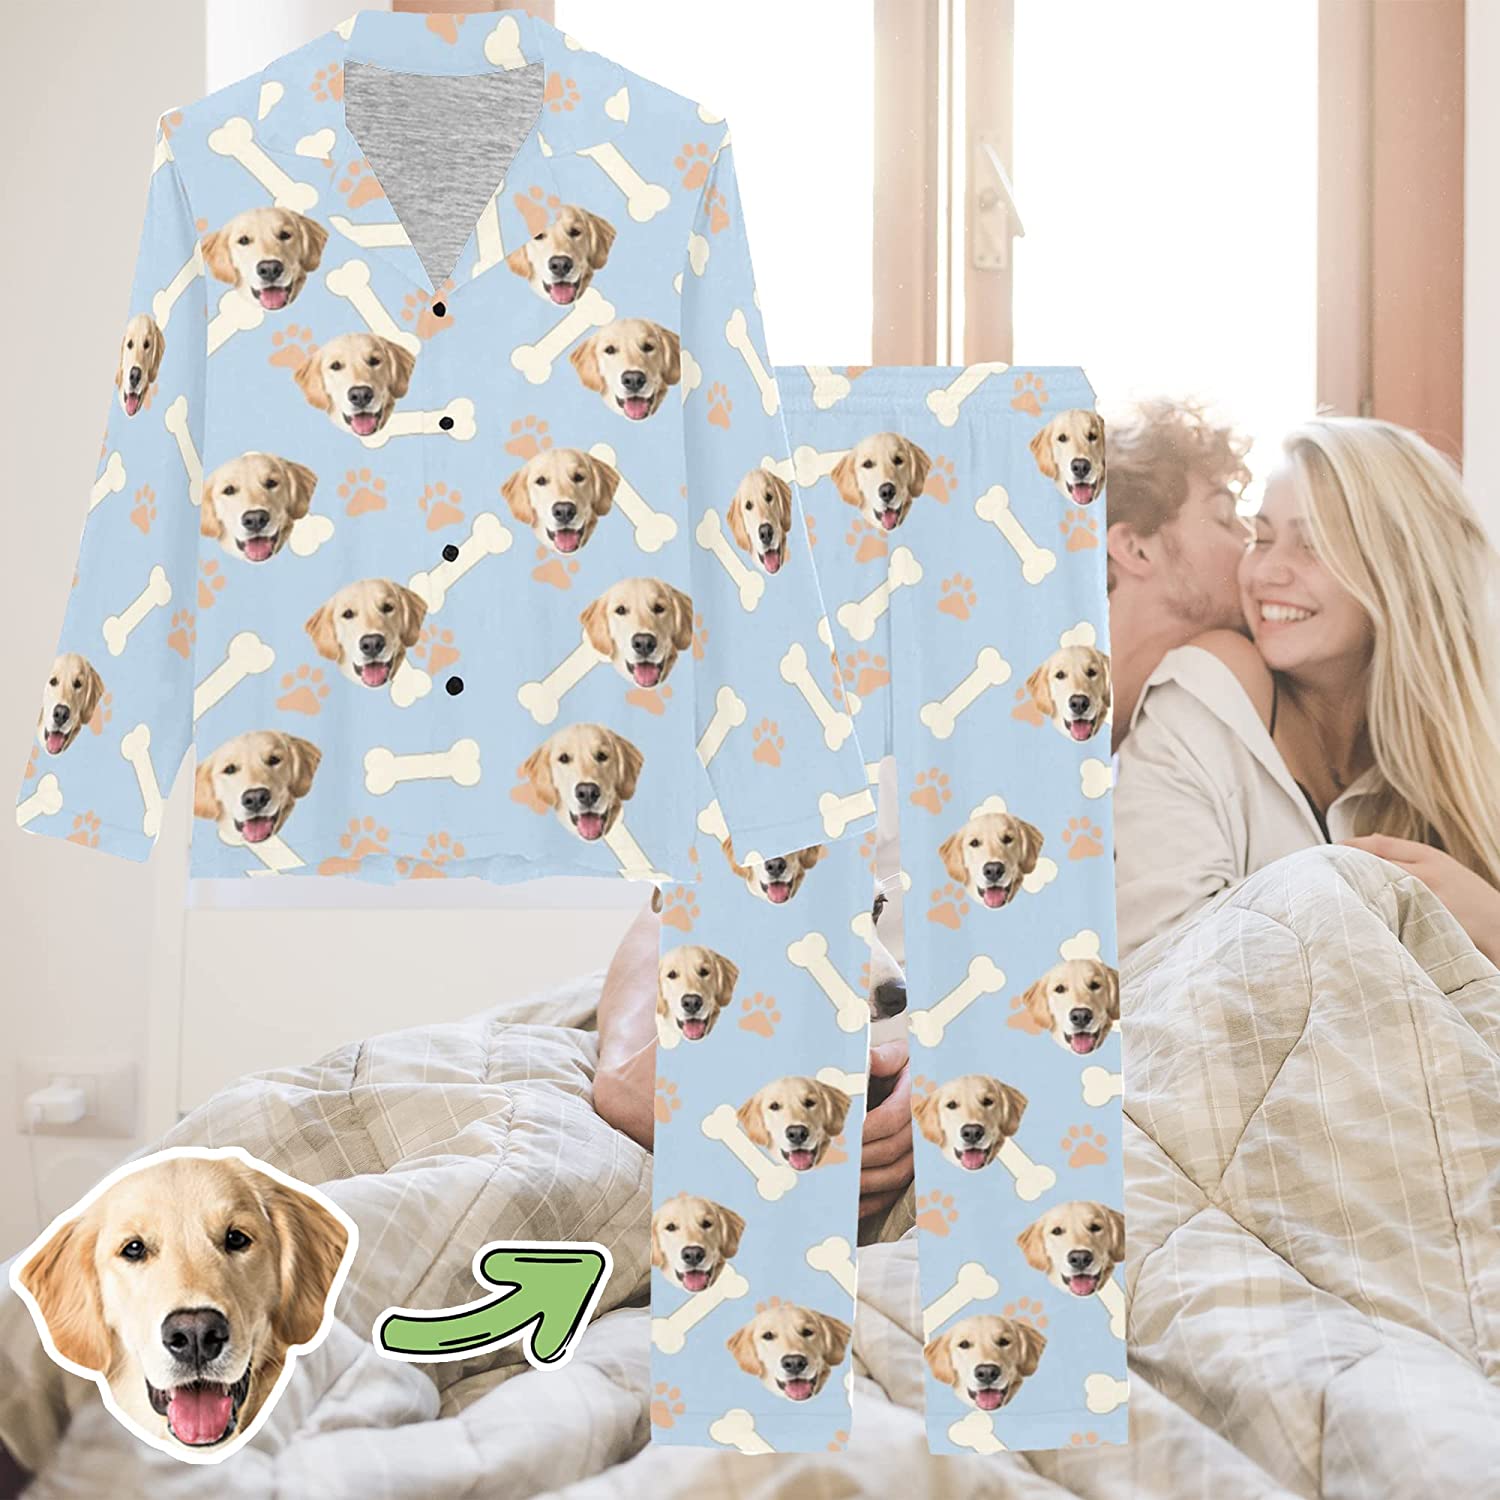 DIYKST Custom Pet Pajamas for Women with Cats Photo Personalized Face on pjs  Sleepwear for Valentine's Day Cat pj Set